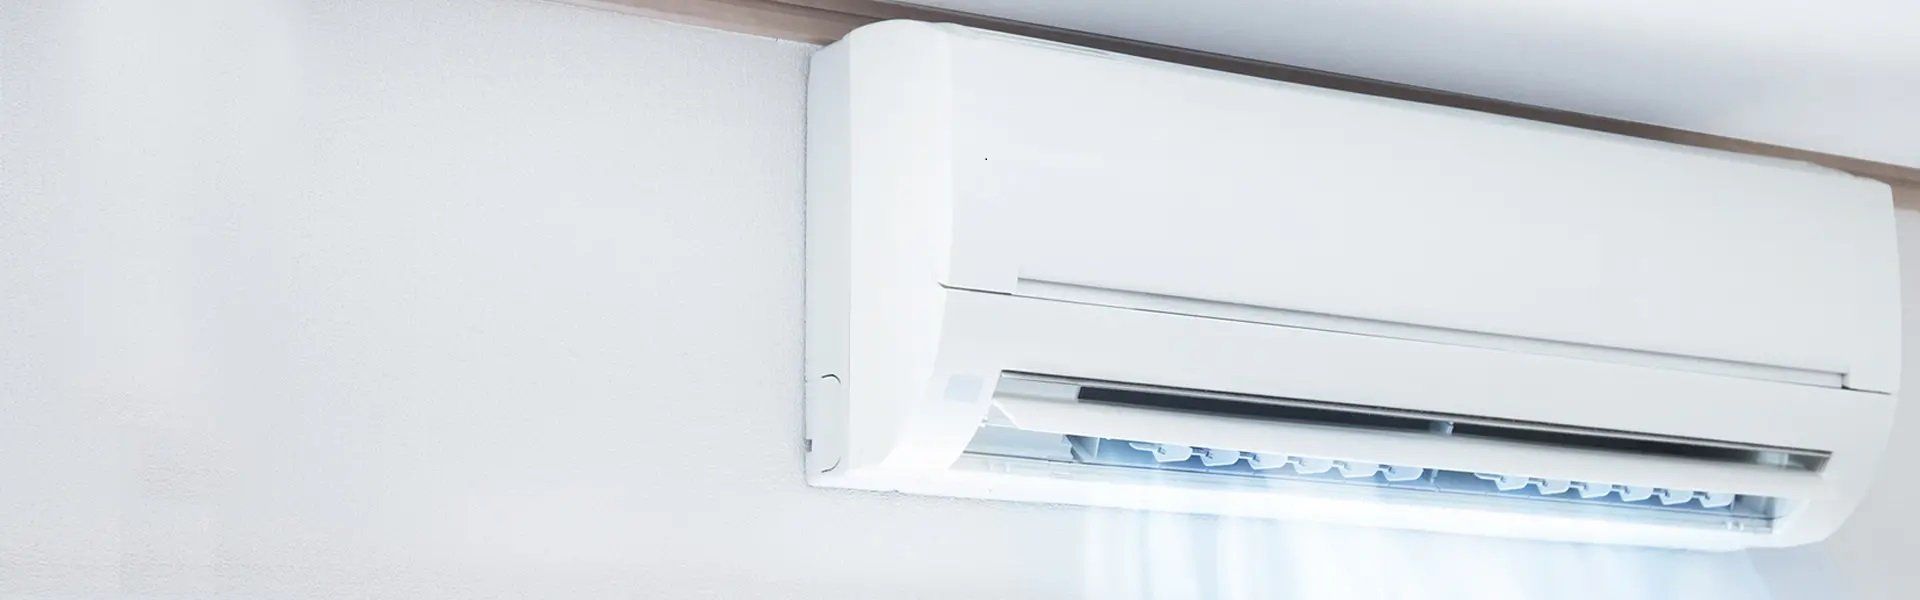 What To Do If Your Air Conditioning Is Leaking